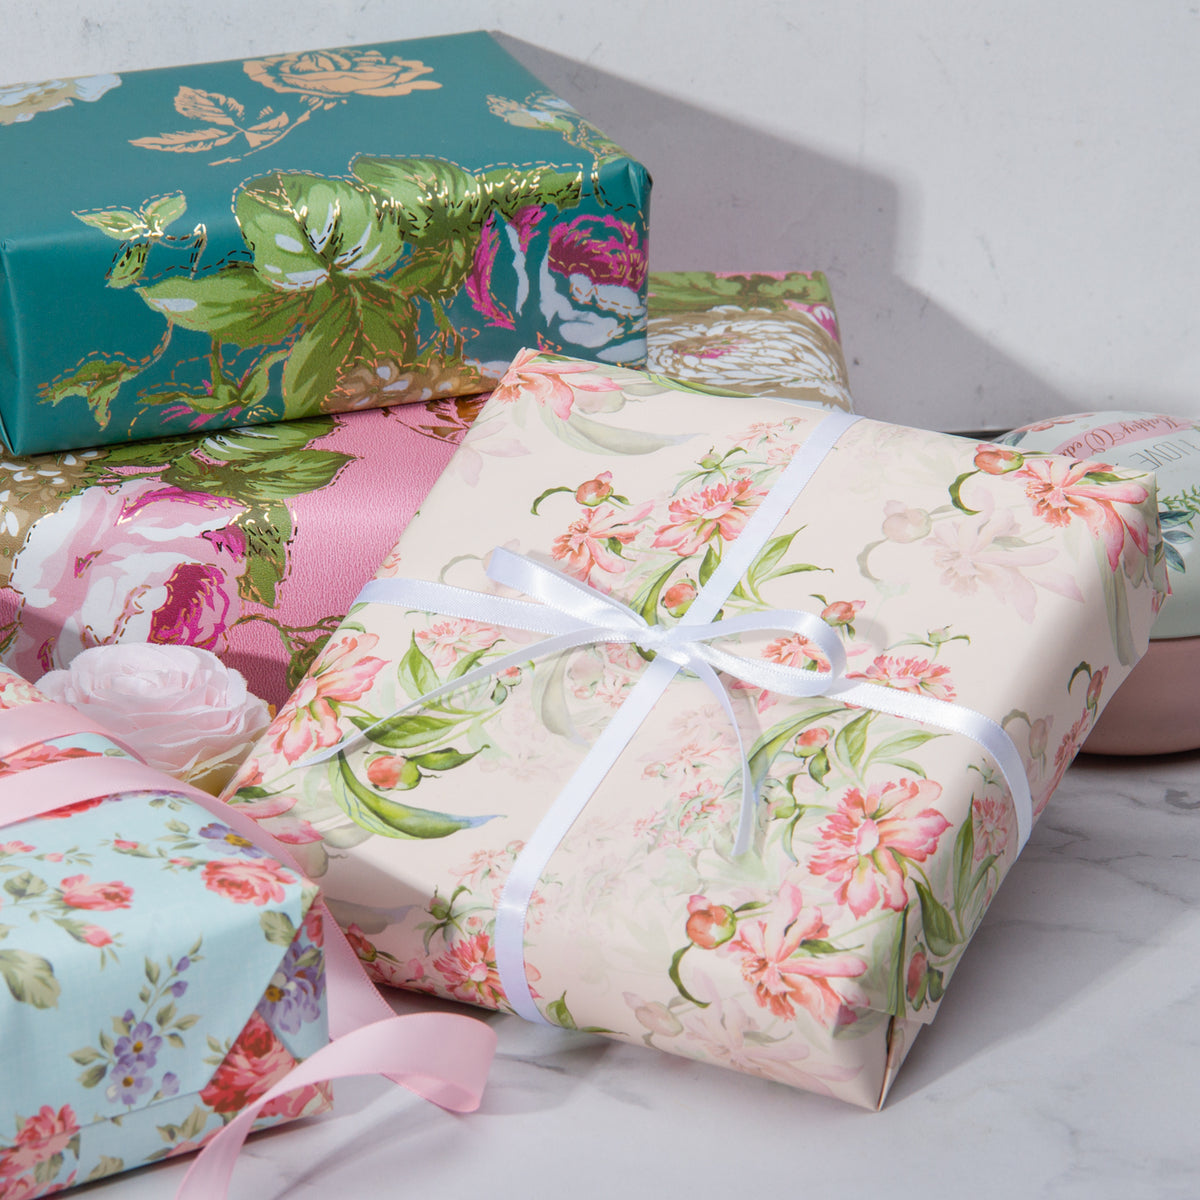 Floral Print Wrapping Paper Sheets Pack Of 5 Each 29 x 19 inches